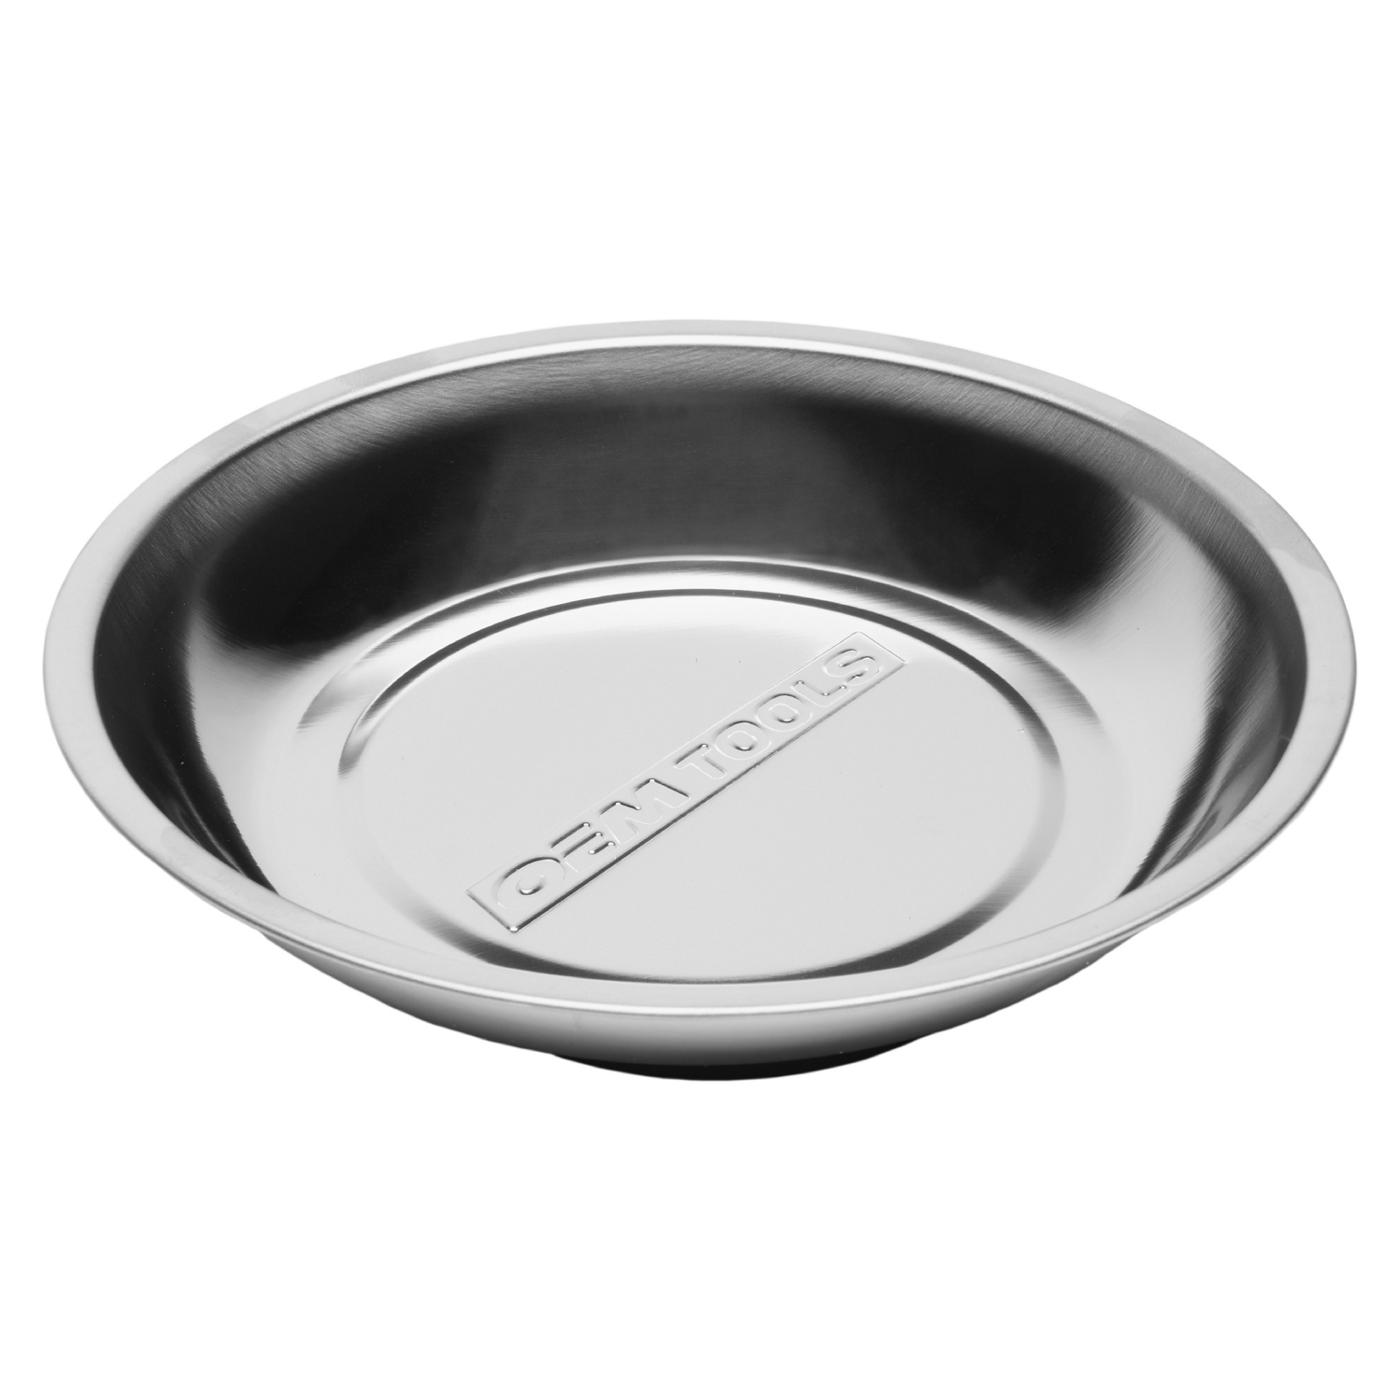 OEM Round Magnetic Tray; image 1 of 7